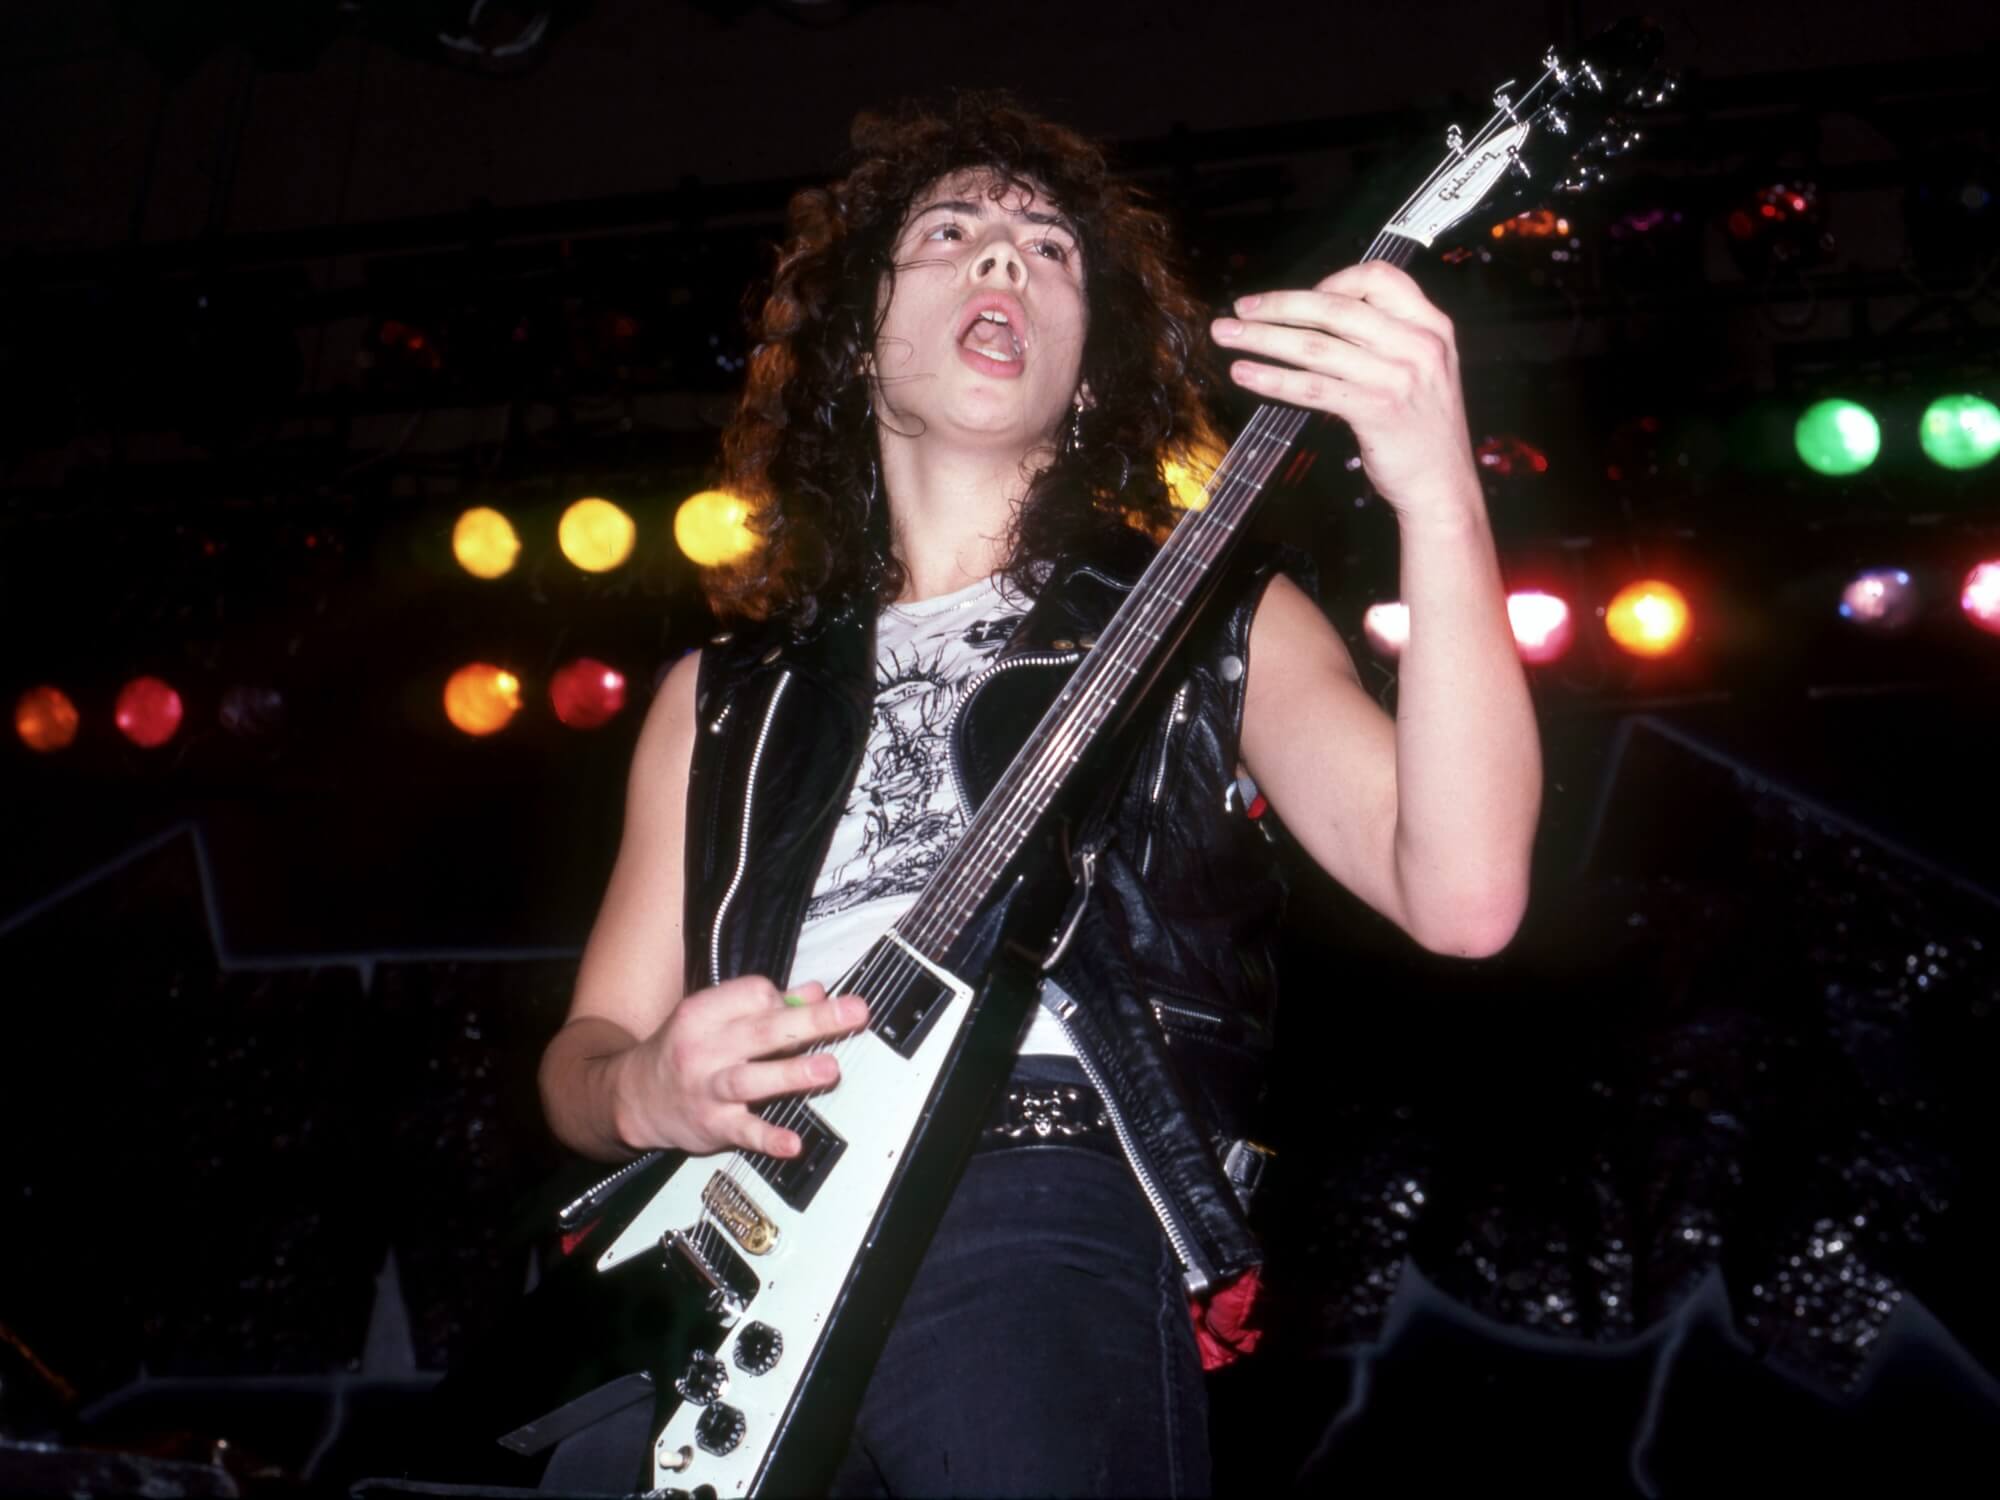 Kirk with the unmodified Flying V he’d use on the early Metallica albums, photo by Ross Marino/Icon and Image/Getty Images